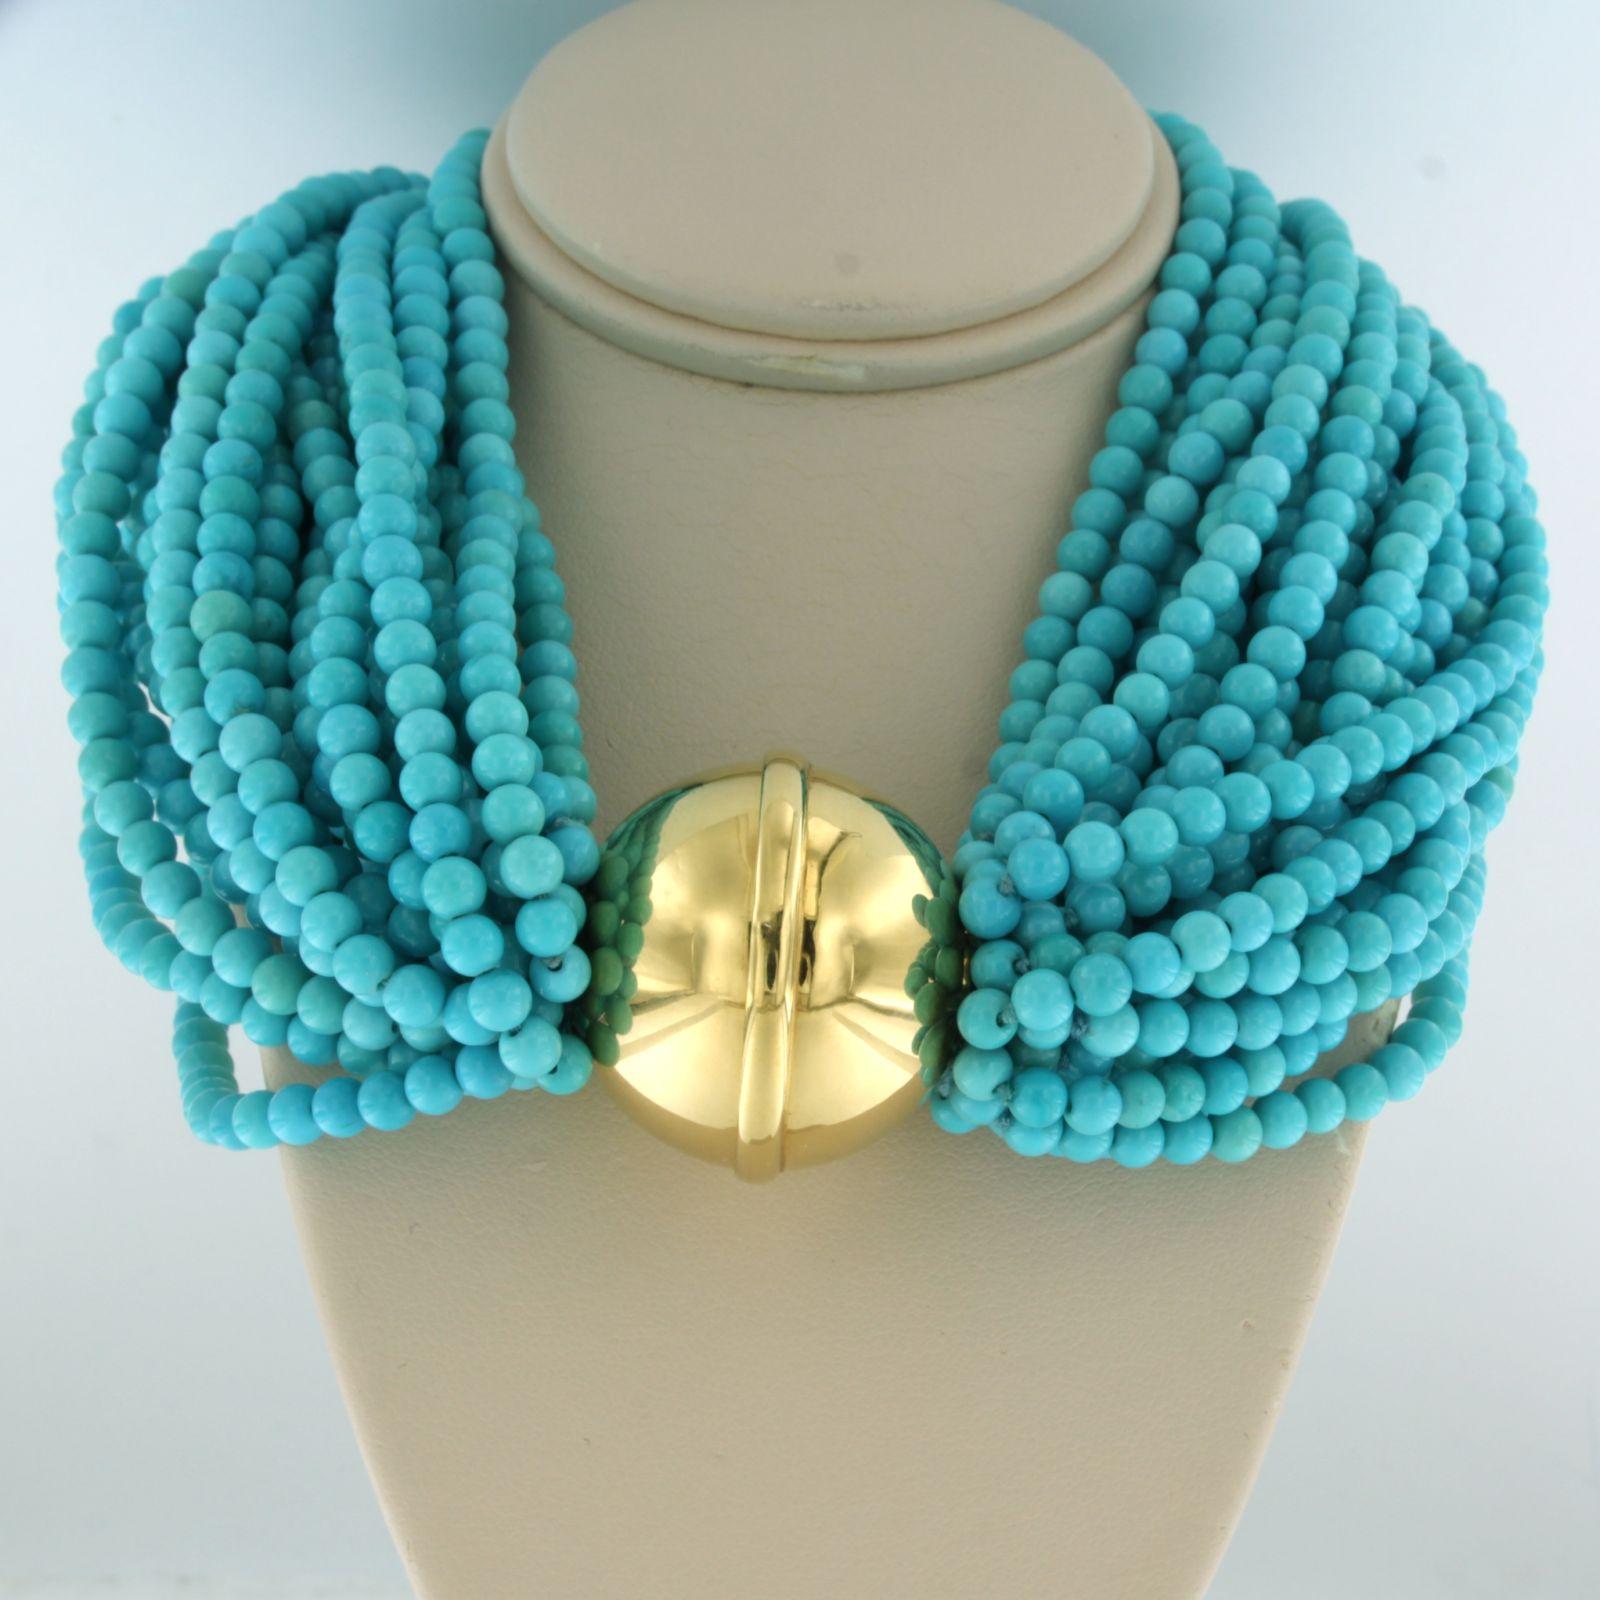 18k yellow gold clasp on a 24 strand turquoise beads - 40cm long

Detailed description

the length of the necklace is 40 cm long and approximately 2.5 cm wide

The size of the lock is 2.9 cm wide in diameter

estimated weight of the lock is 40